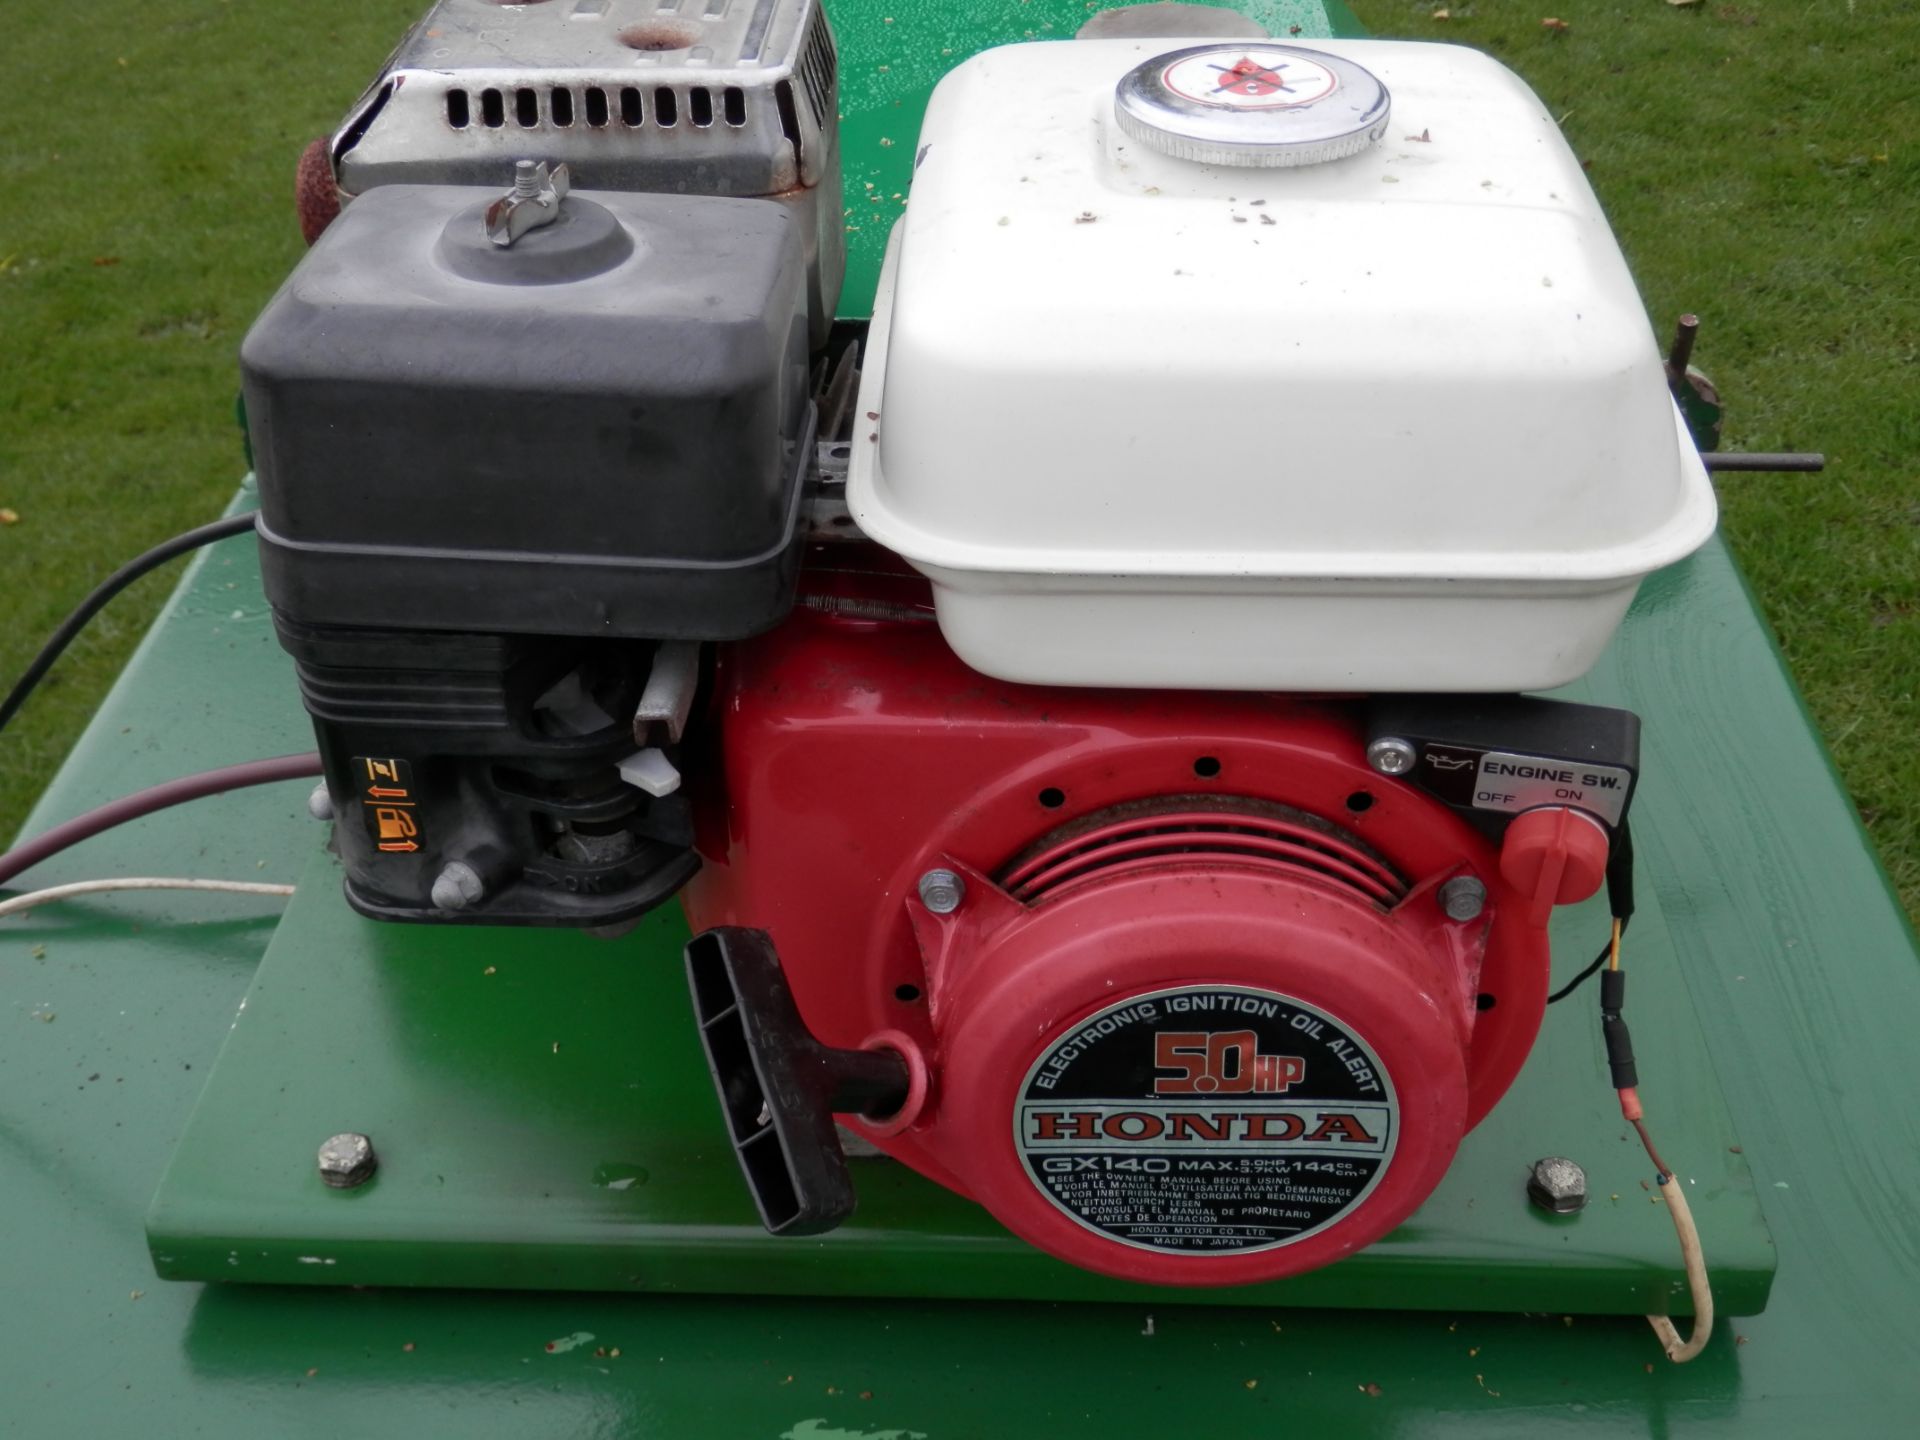 LARGE 1990S DENNIS LAWN ROLLER WITH HONDA 5 HP PETROL ENGINE. - Image 7 of 9